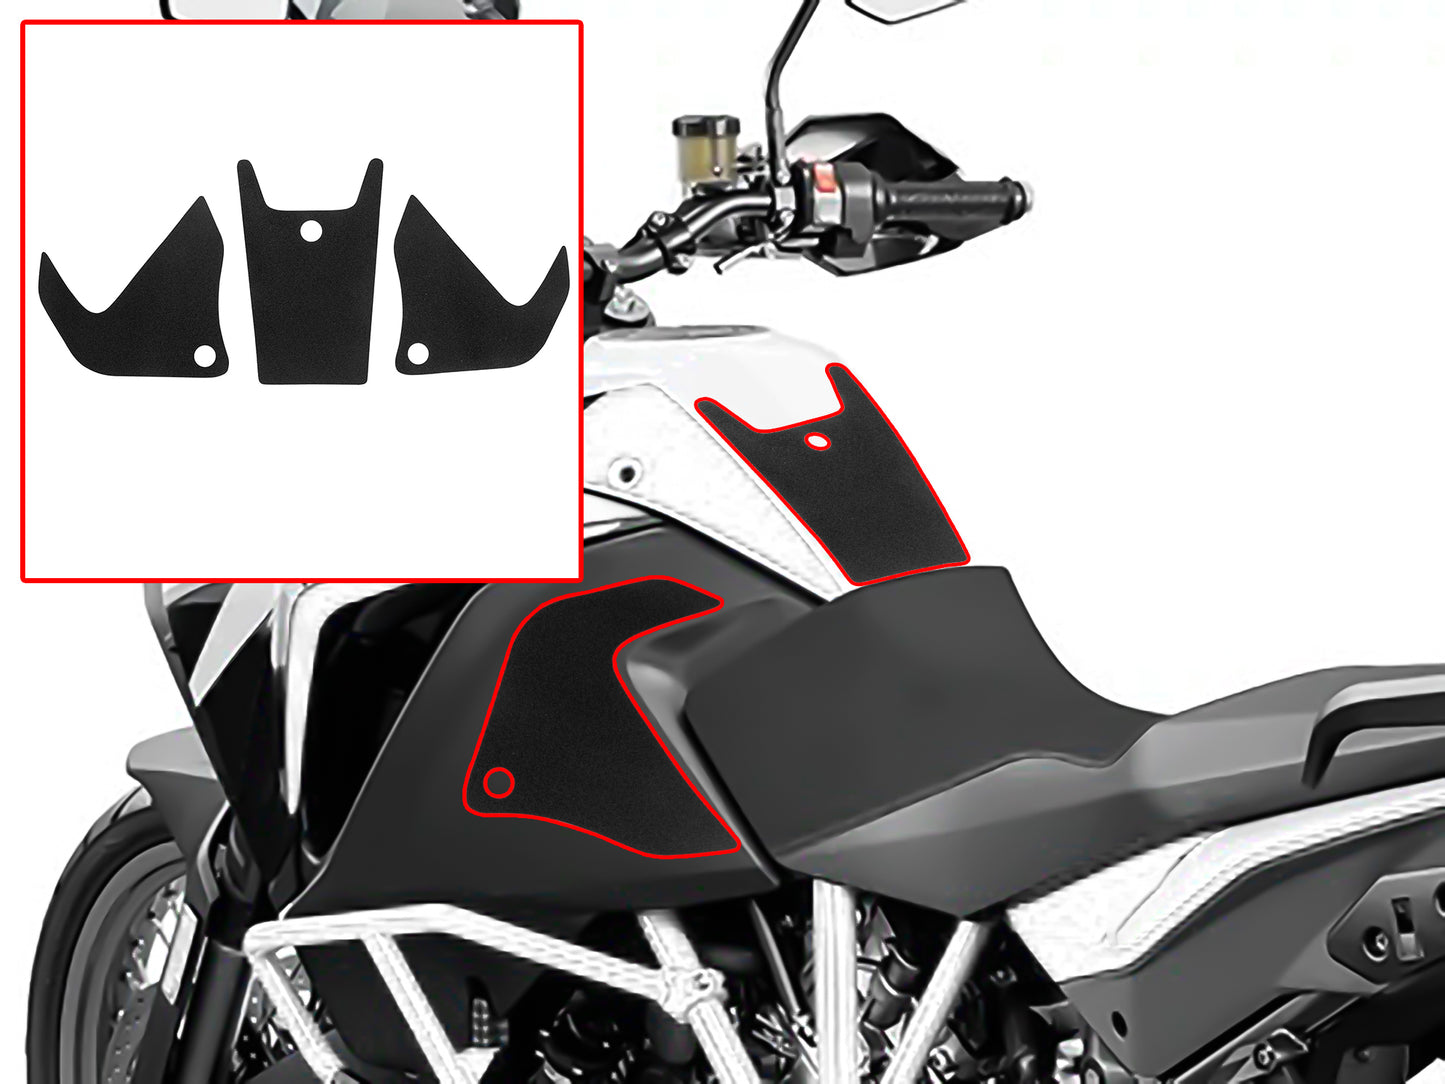 Wolfline Motorcycle Anti Slip Tank Pad Stickers Side Gas Tank Pad Knee Grip Decals Protection For KTM 1050 1190 1290 Adv